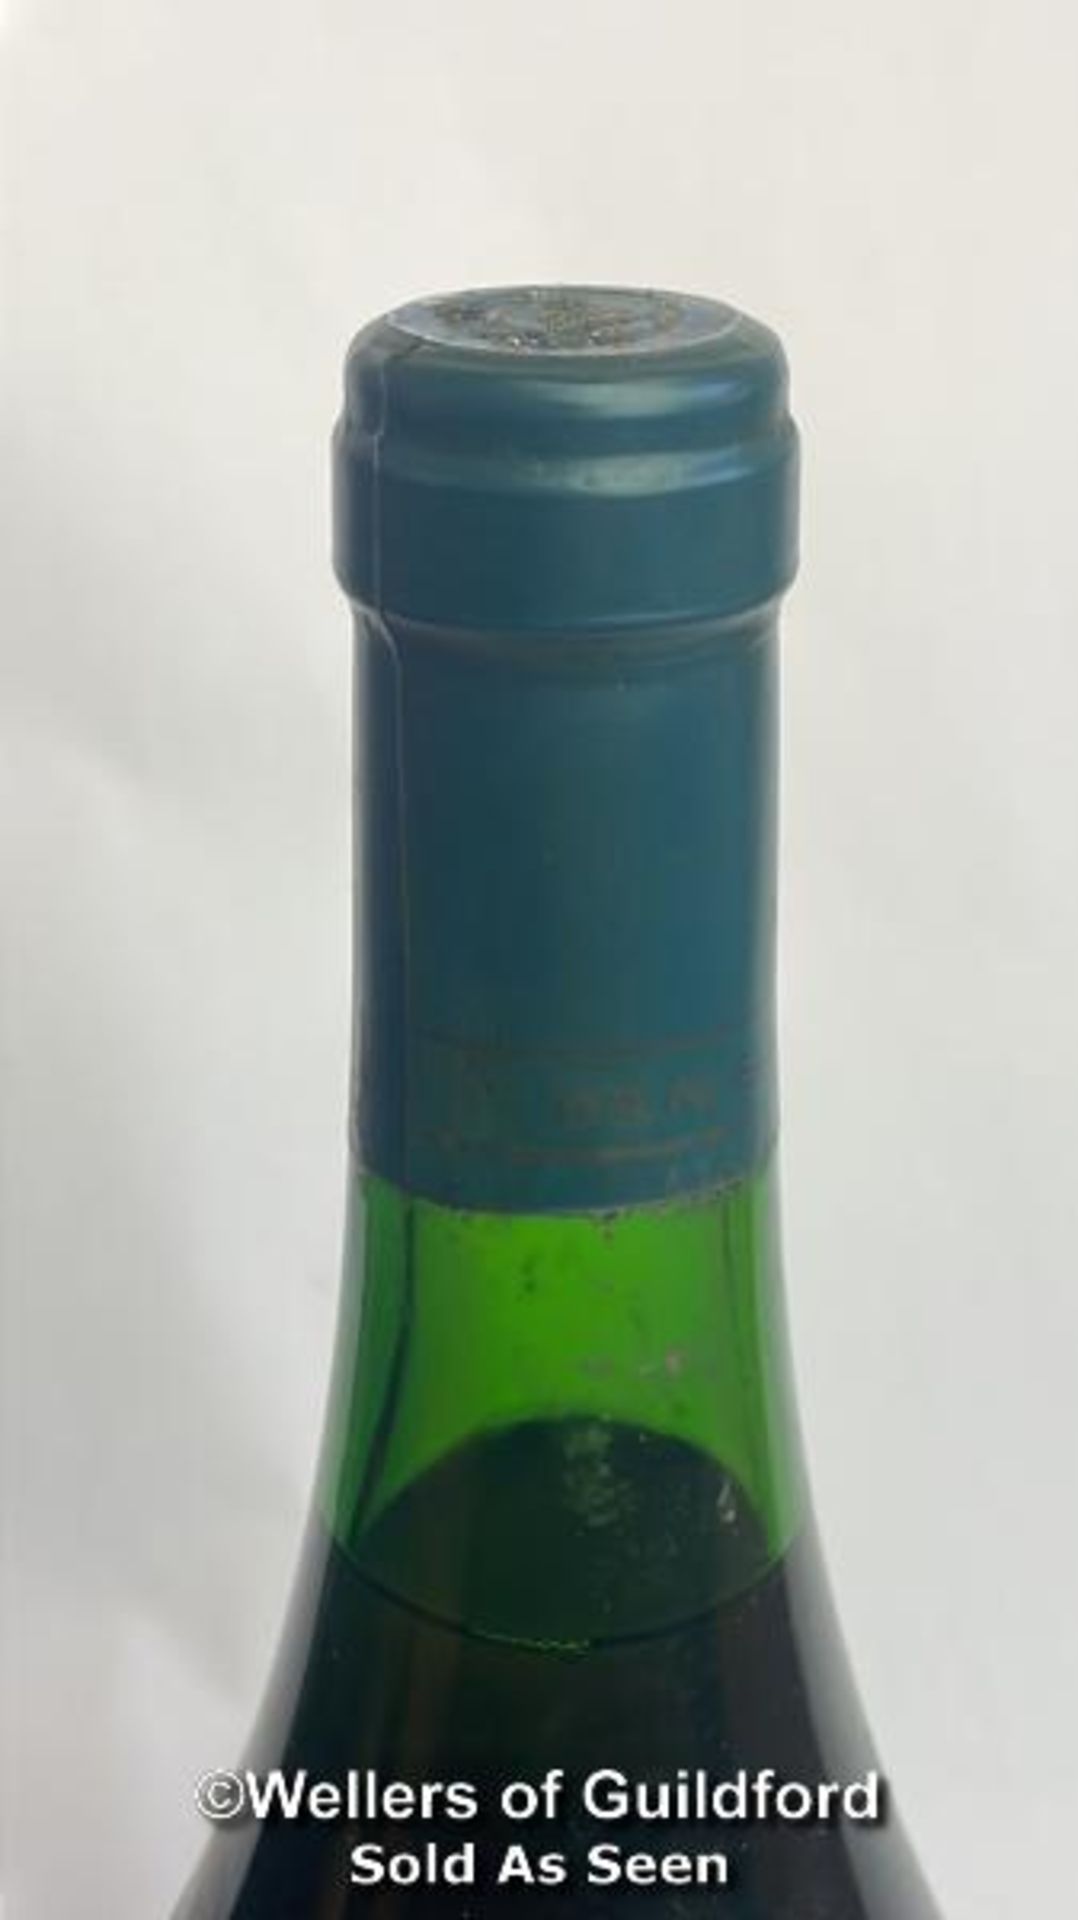 1992 Denbies Pino Gris, 75cl, 10.5% vol / Please see images for fill level and general condition. - Image 5 of 5